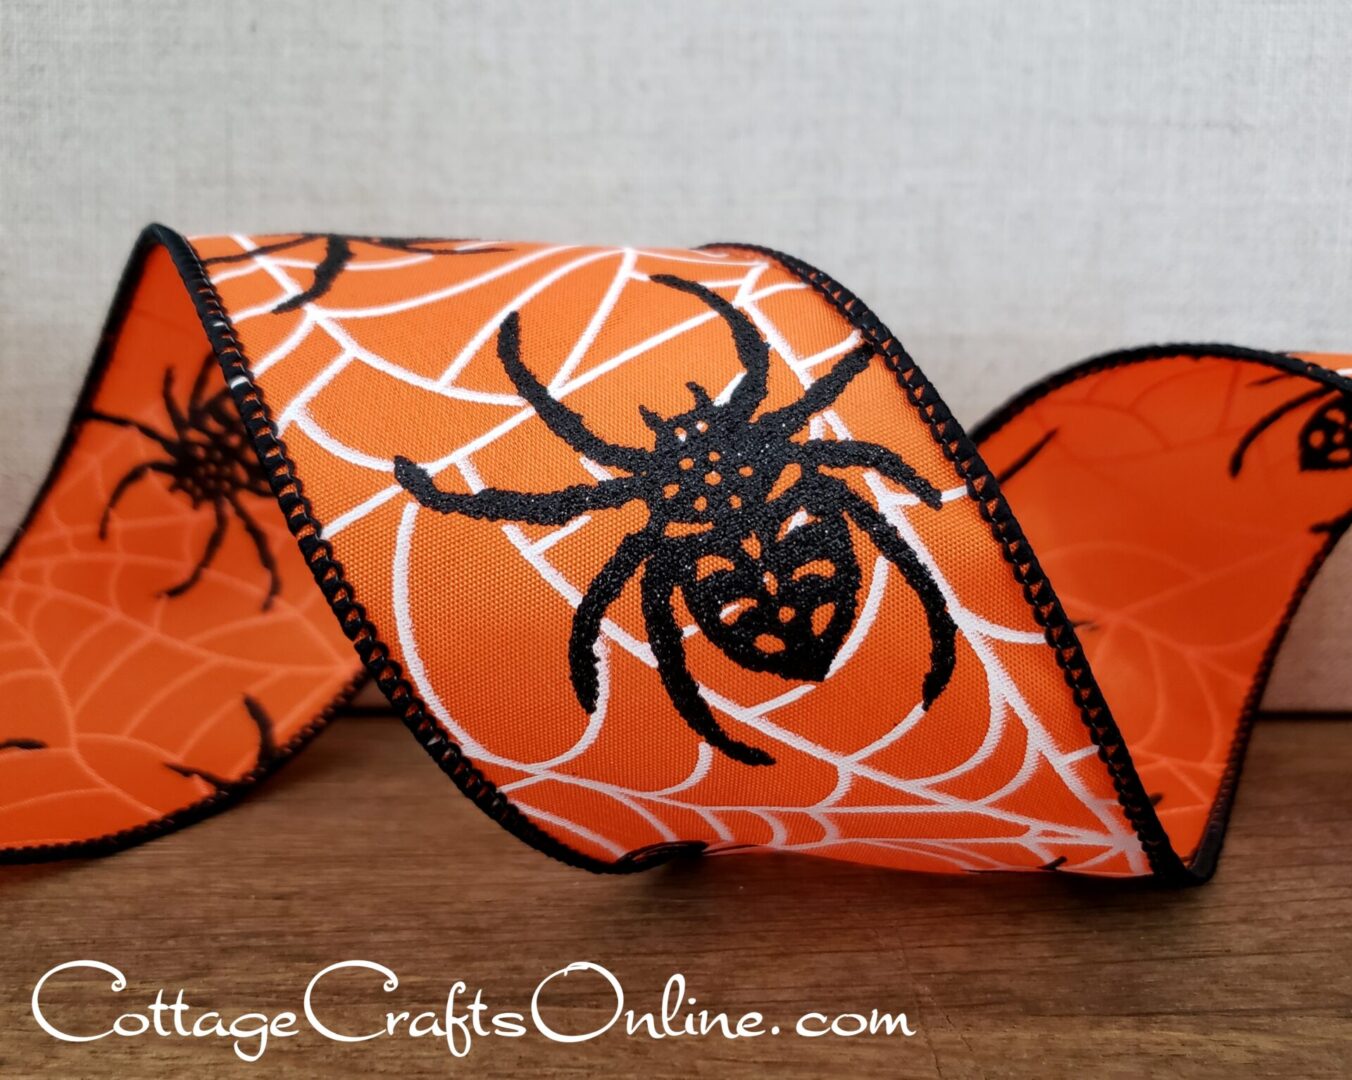 Black glitter spiders in white webs on orange satin 2.5" wide wired ribbon from the Etsy shop of Cottage Crafts Online.